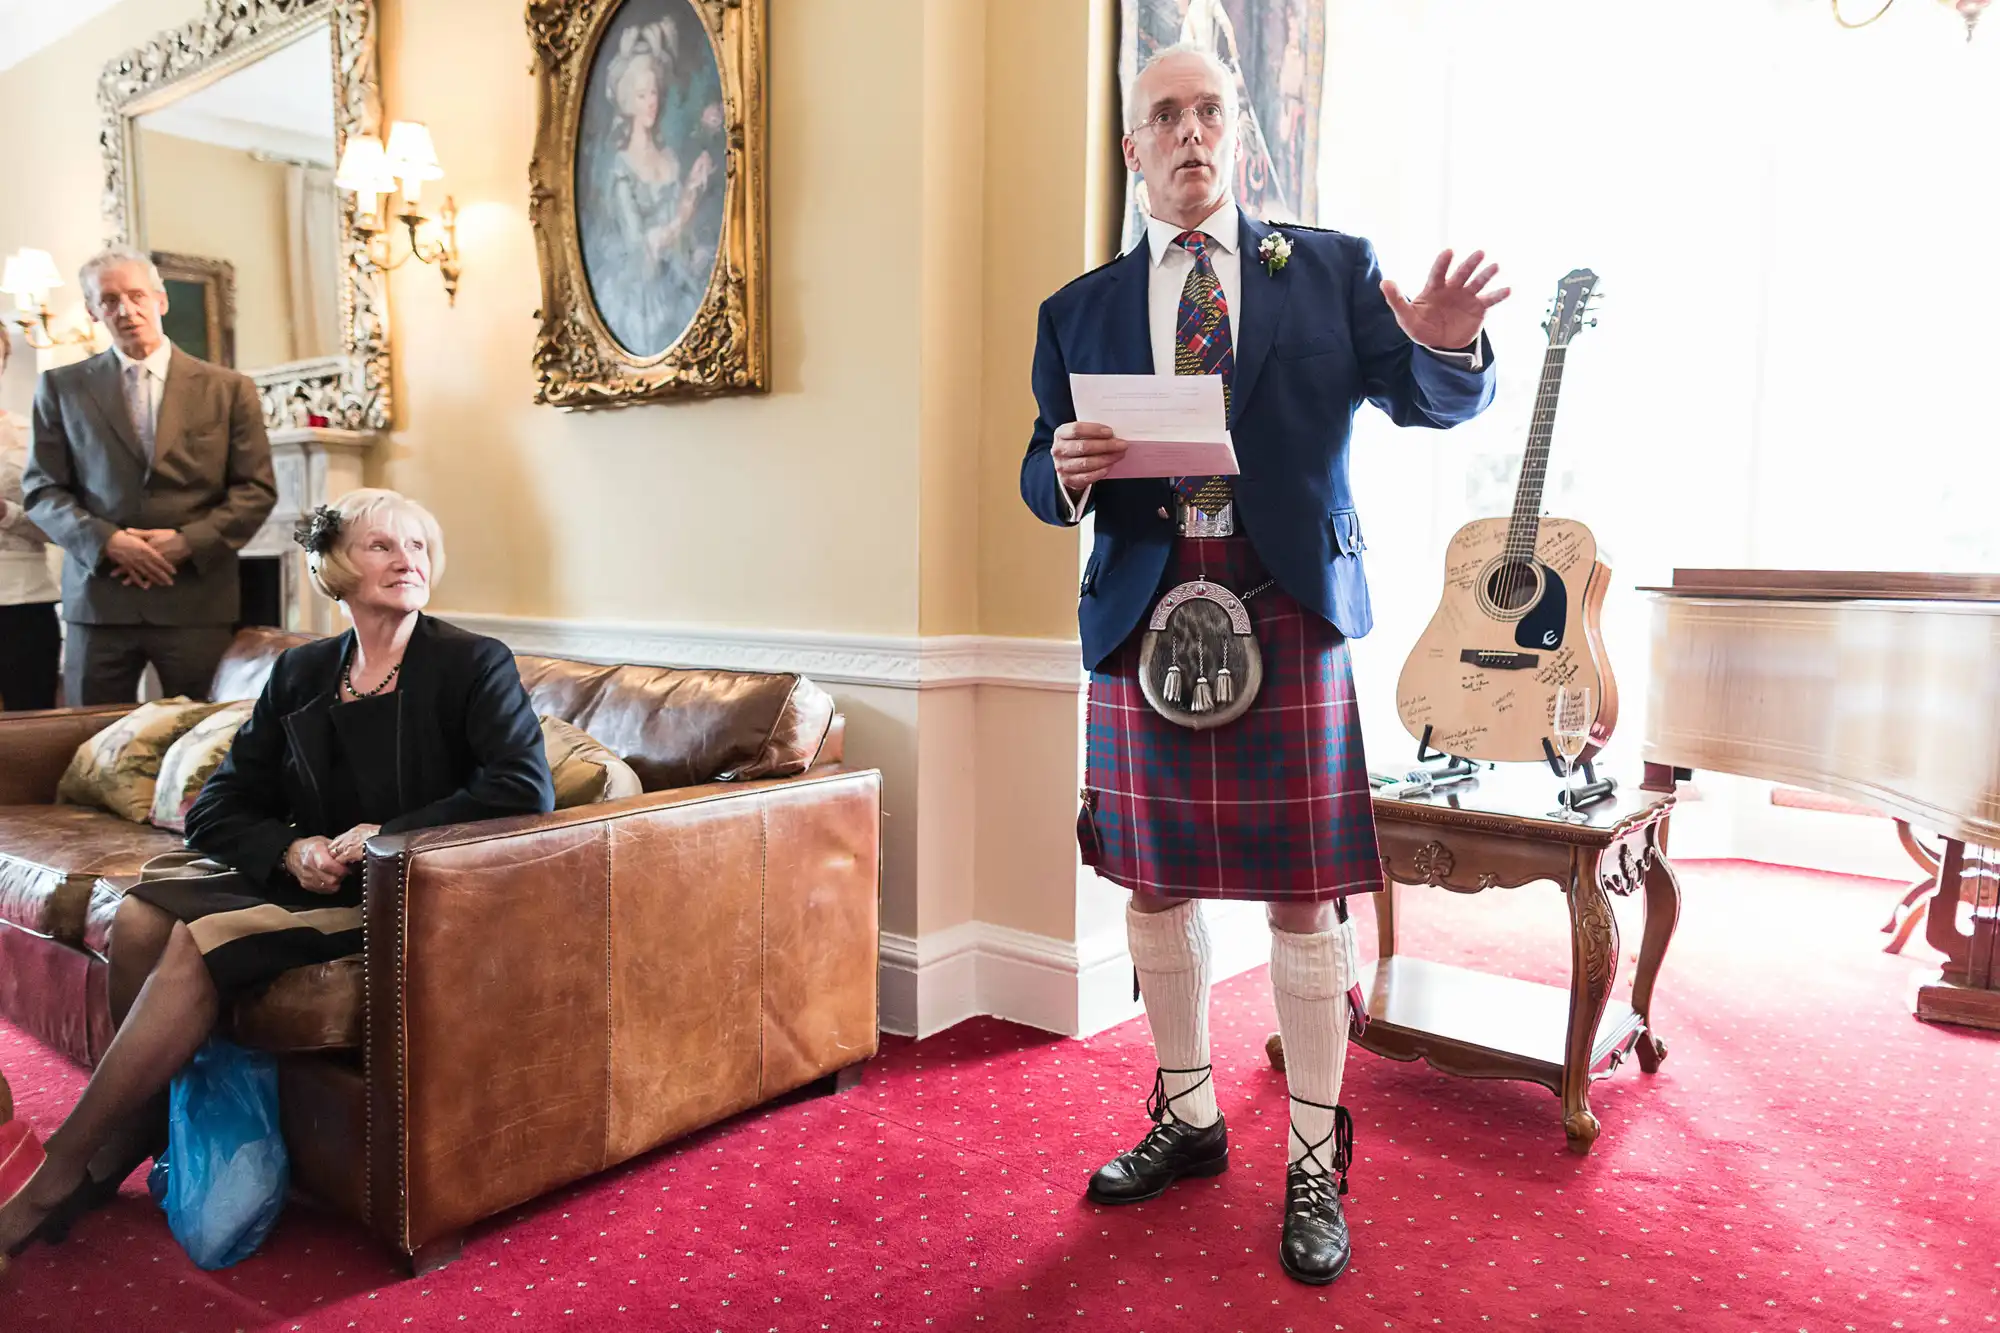 An elderly man in a kilt and sporran speaks from a paper in a formal room with seated listeners, portraits on the wall, and a guitar on display.